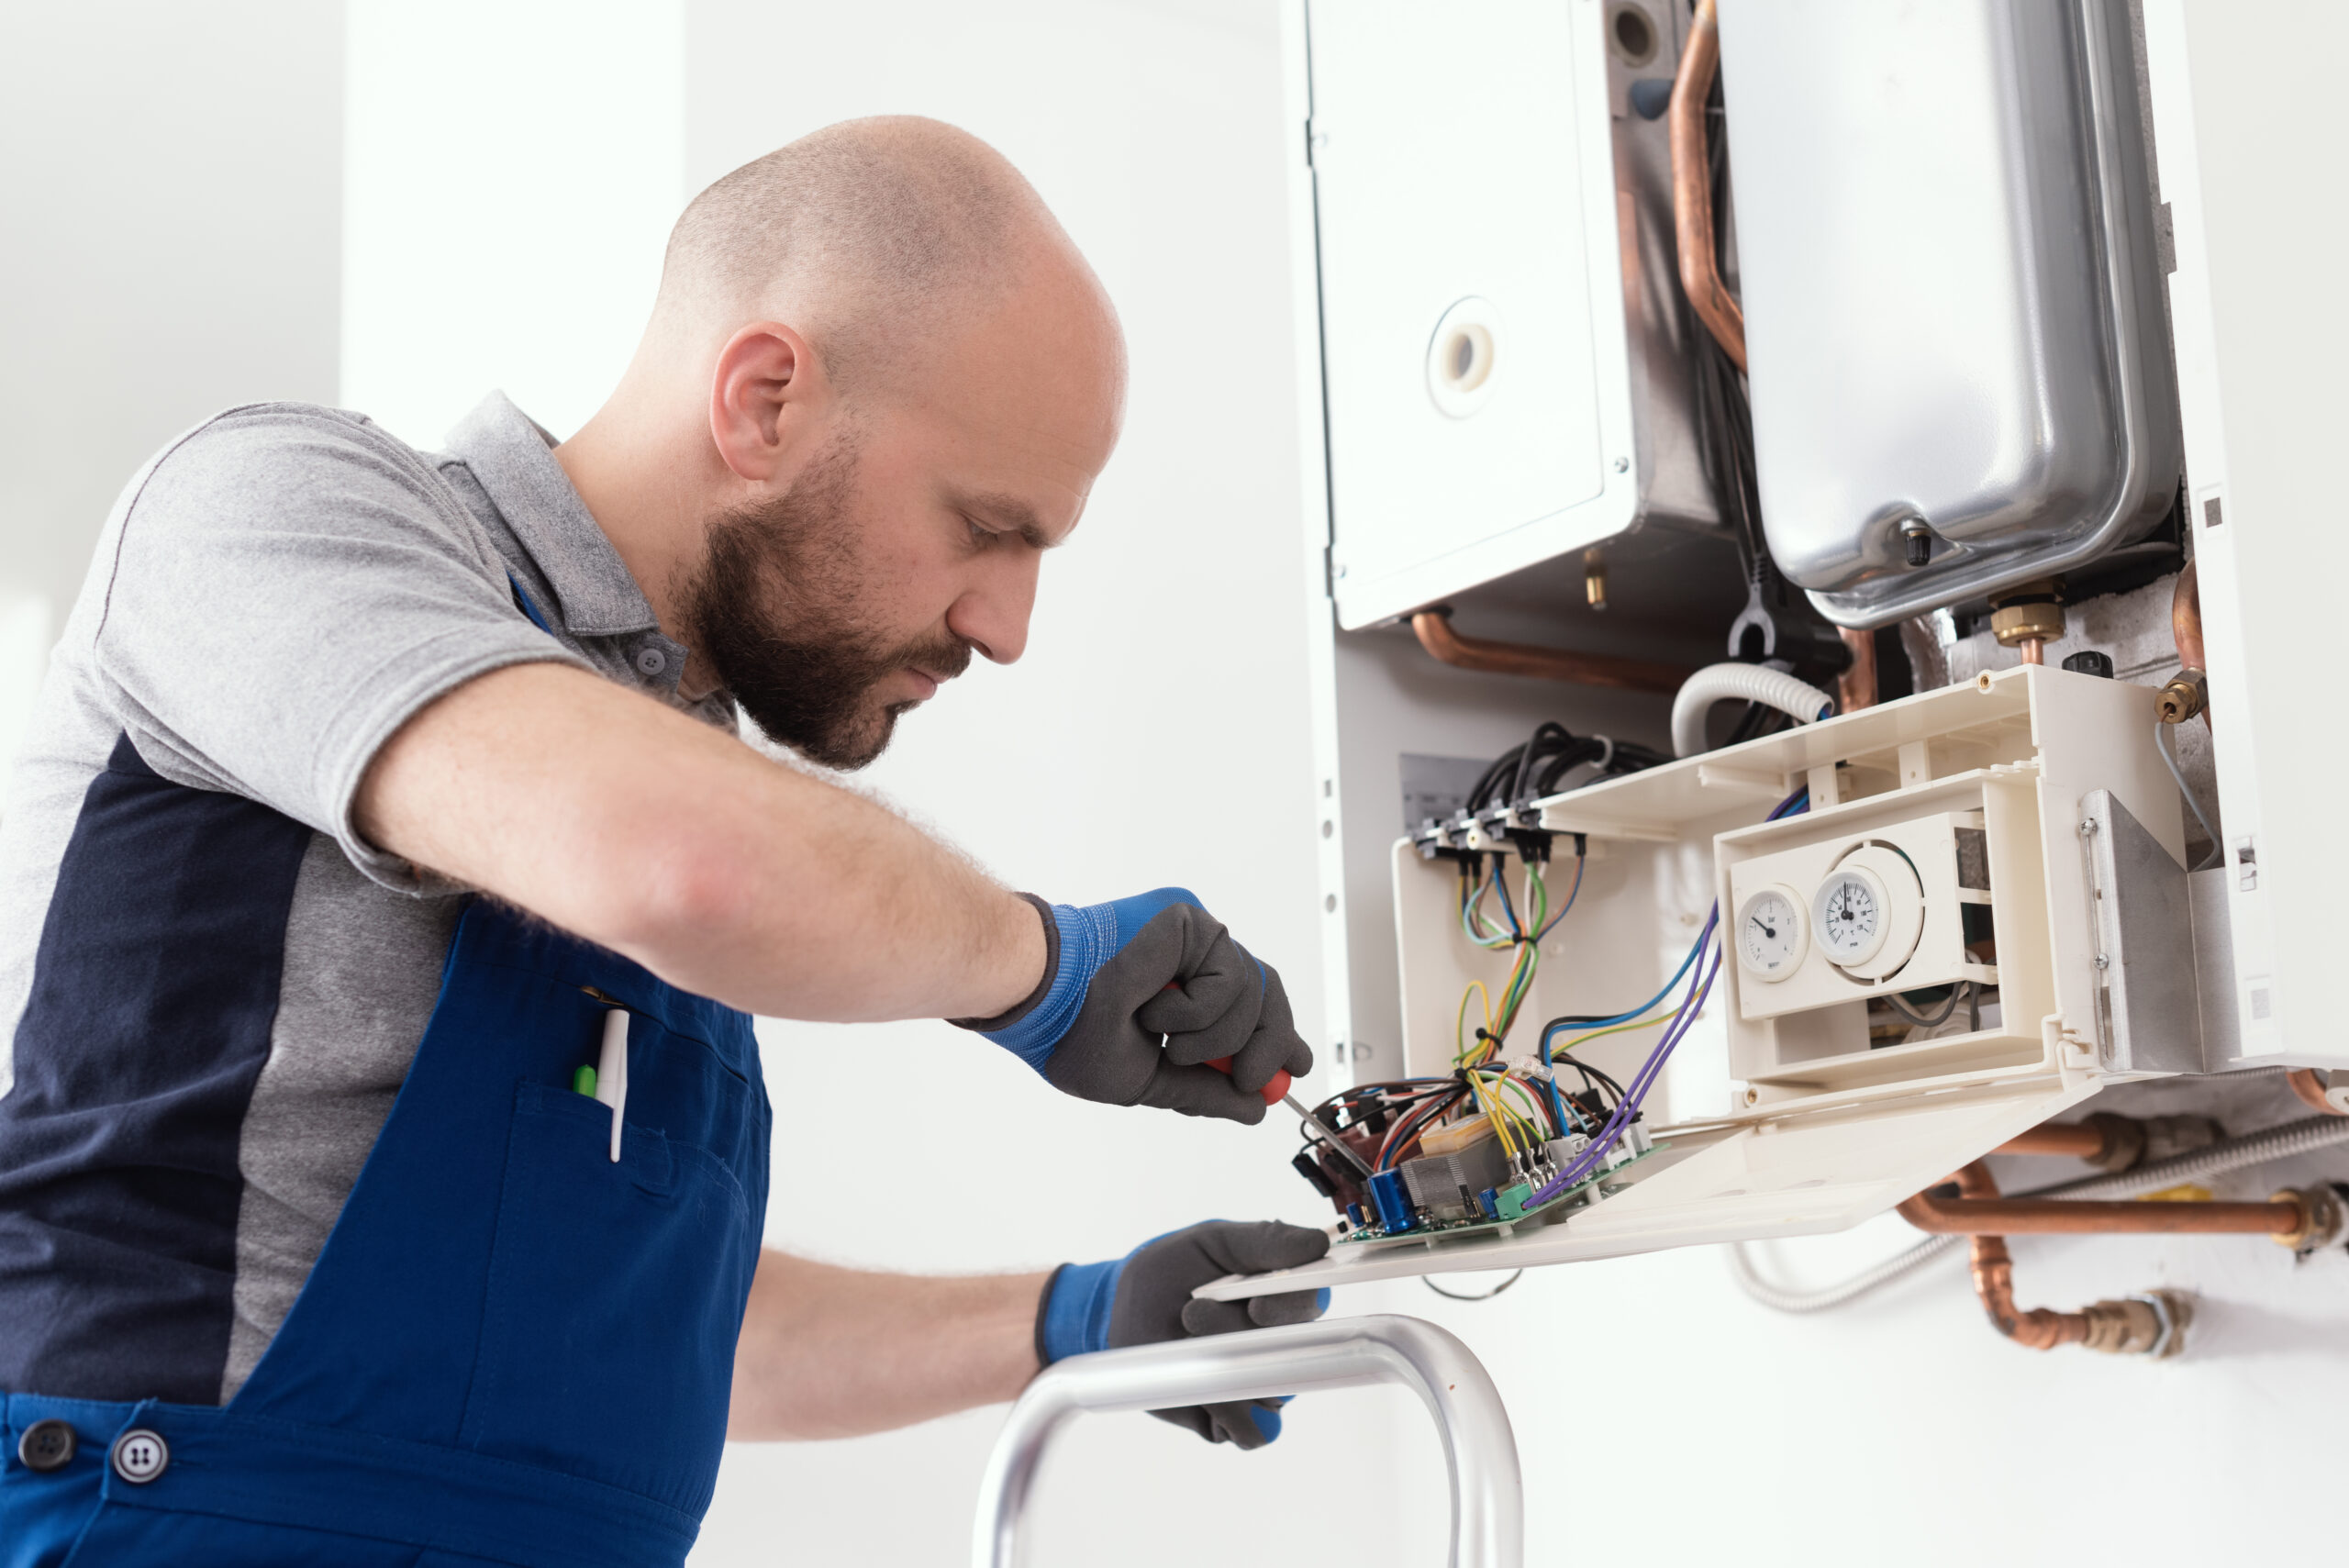 HVAC technician performing a repair service on a residential boiler